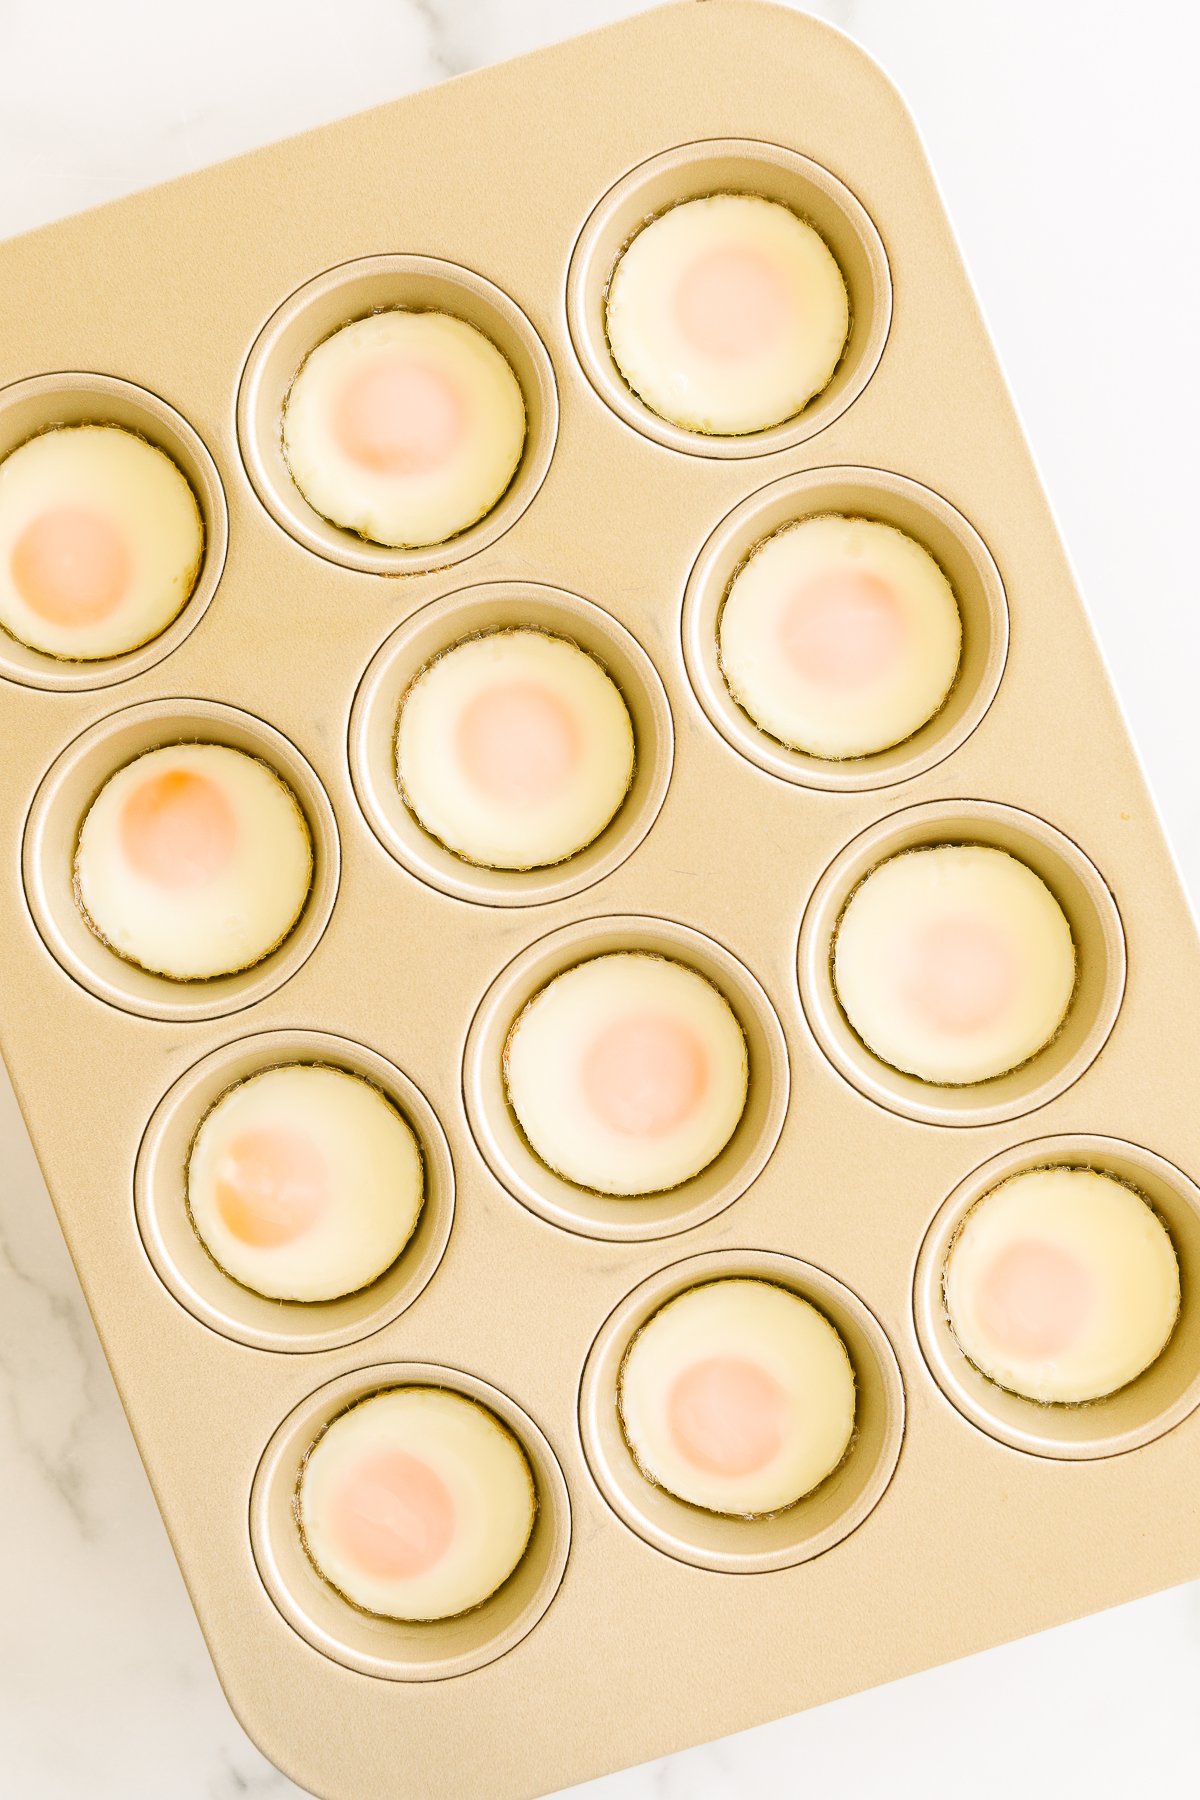 A muffin tin containing a dozen raw eggs with yolks intact.